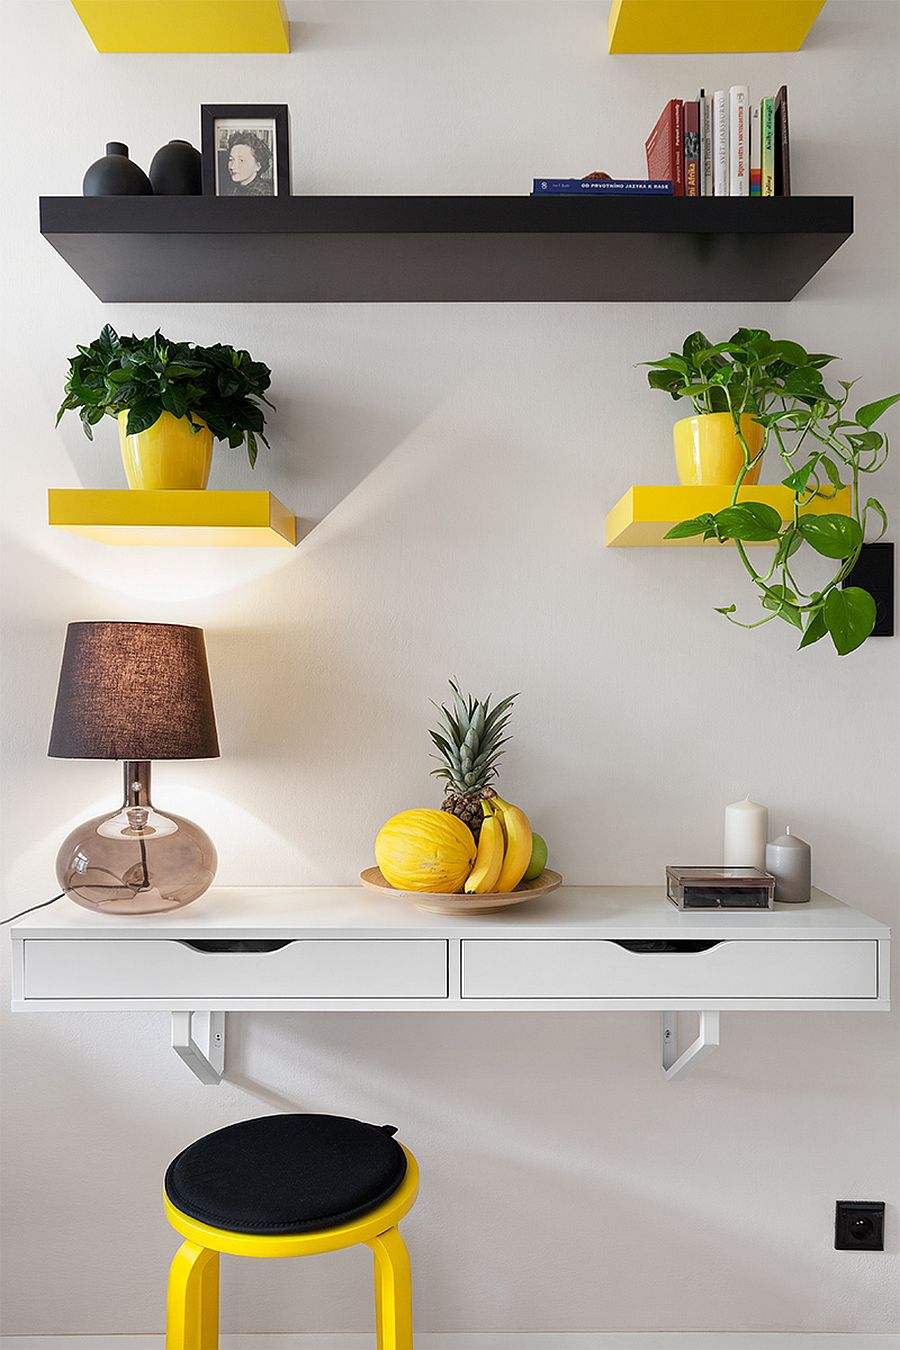 Yellow-and-black-floating-shelves-act-as-plant-holders-inside-this-budget-friendly-apartment